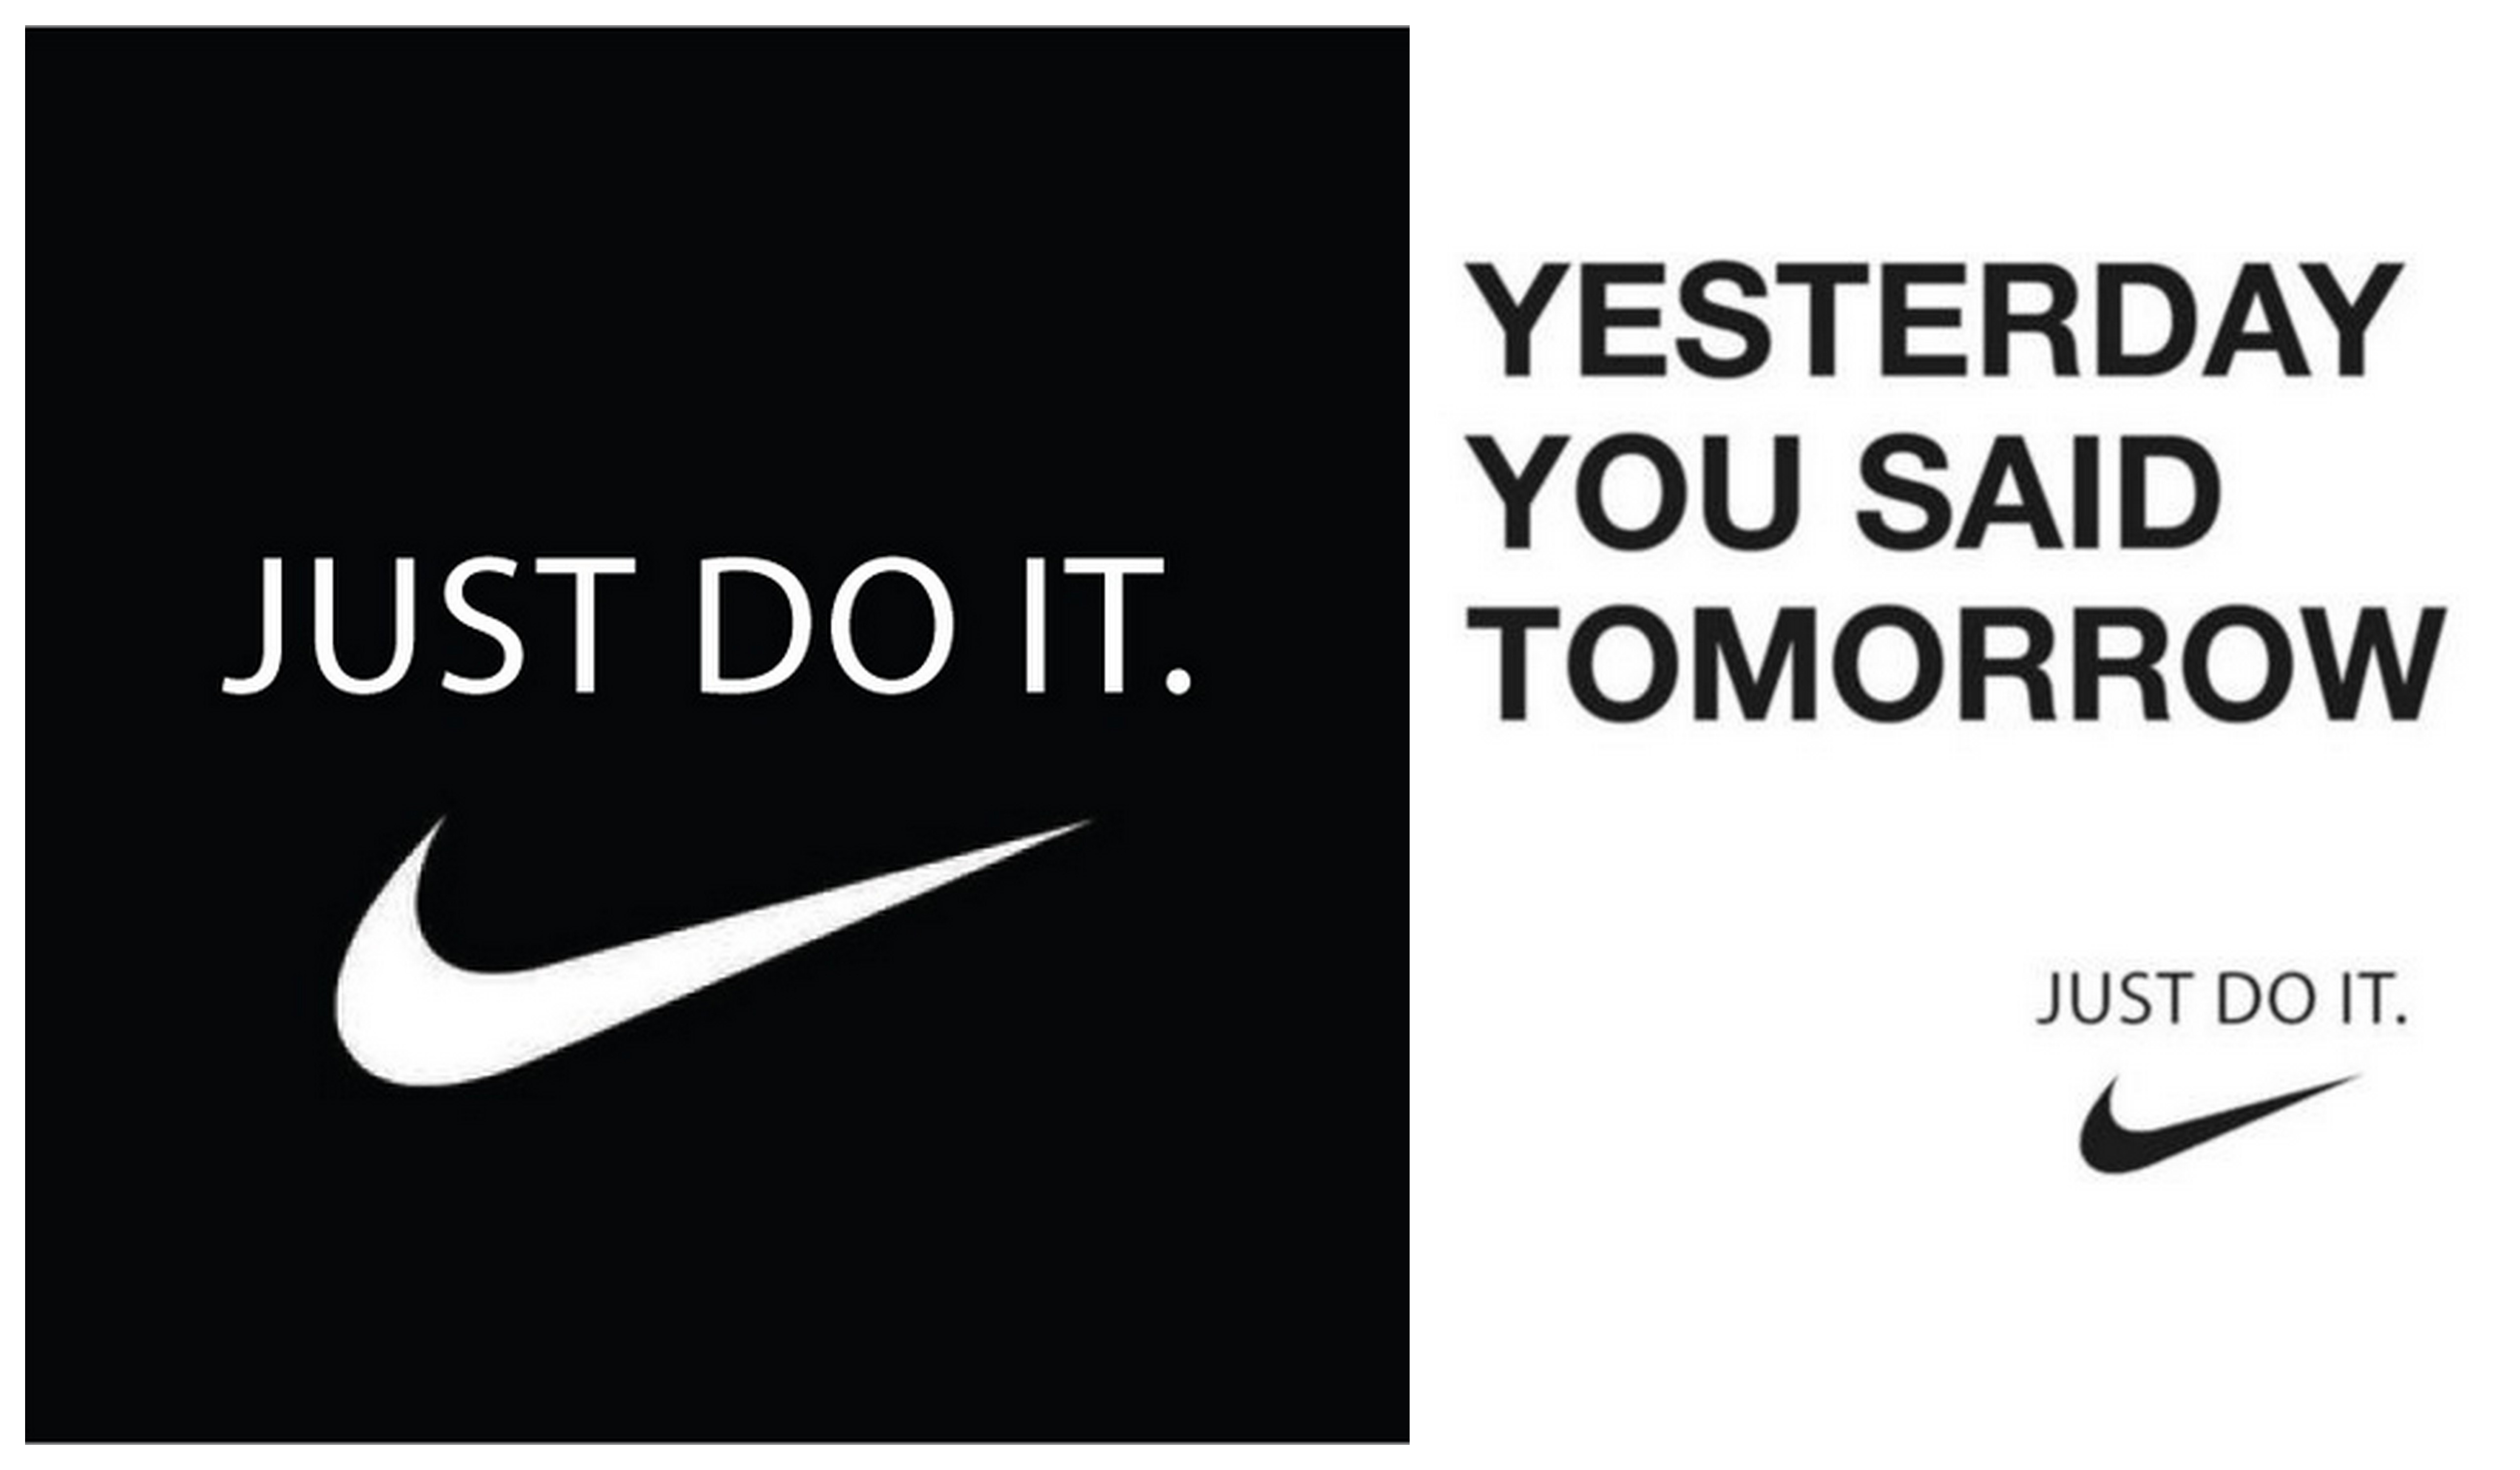 mike just do it